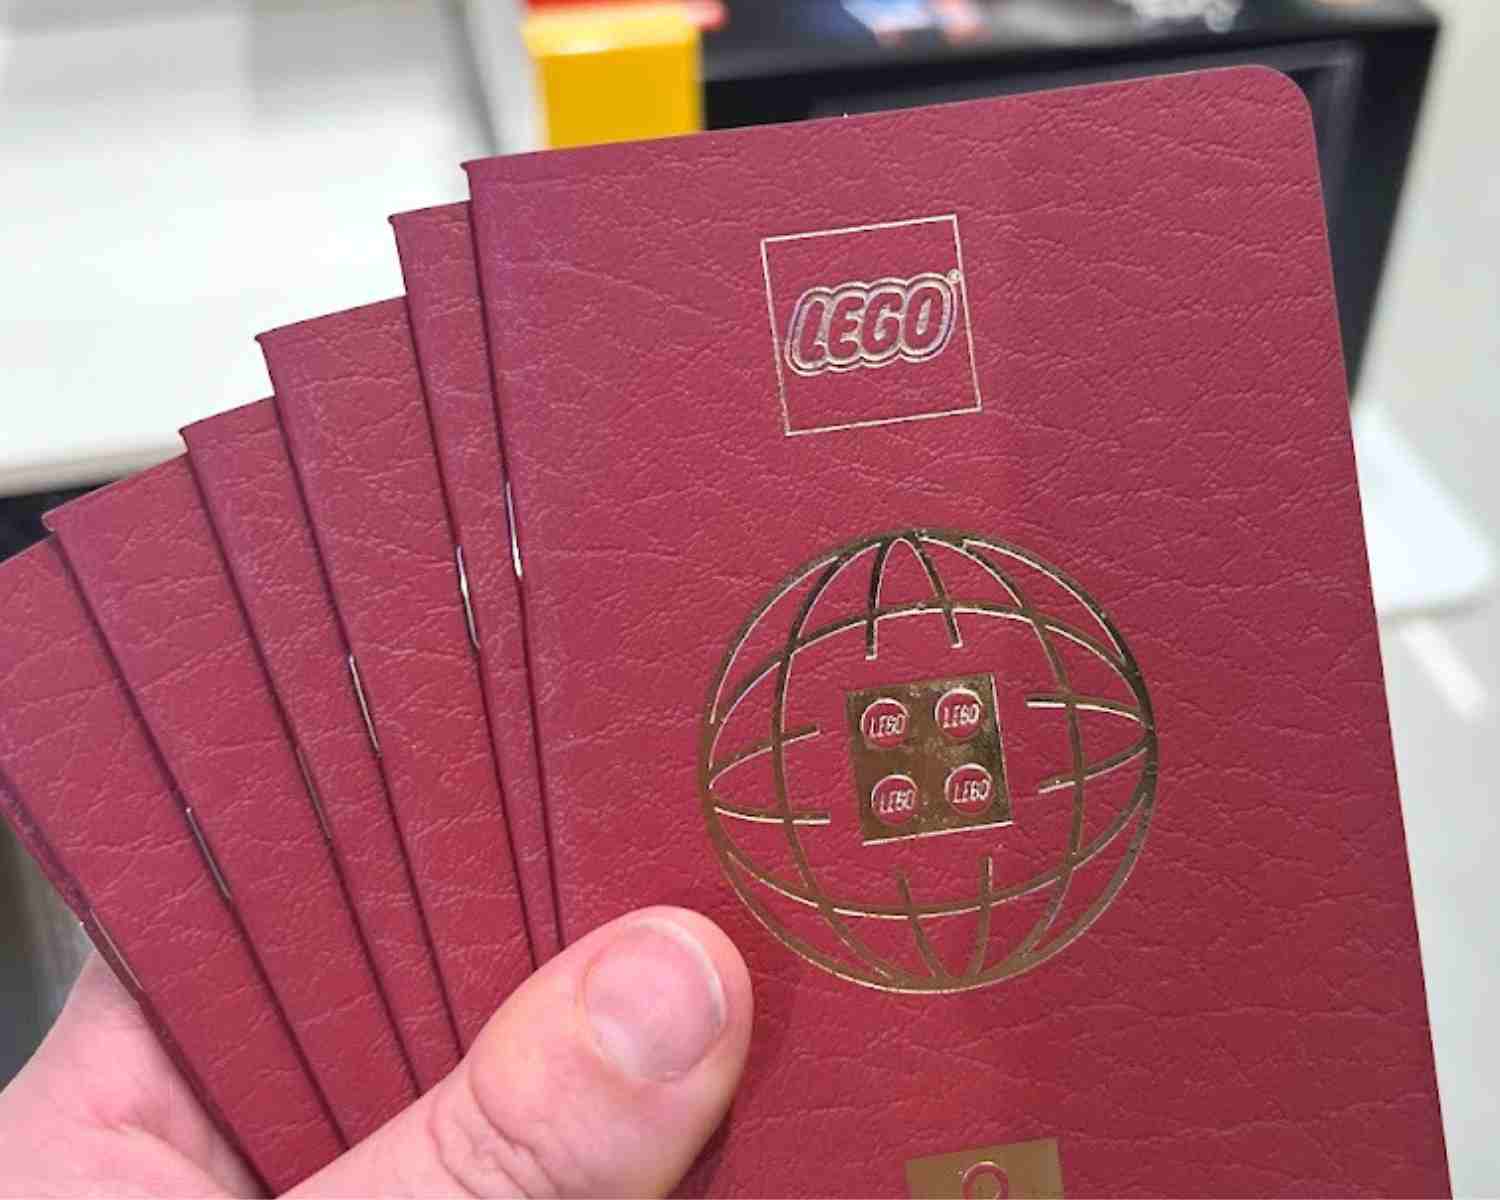 The famous LEGO Passports available at Sydney LEGO shops